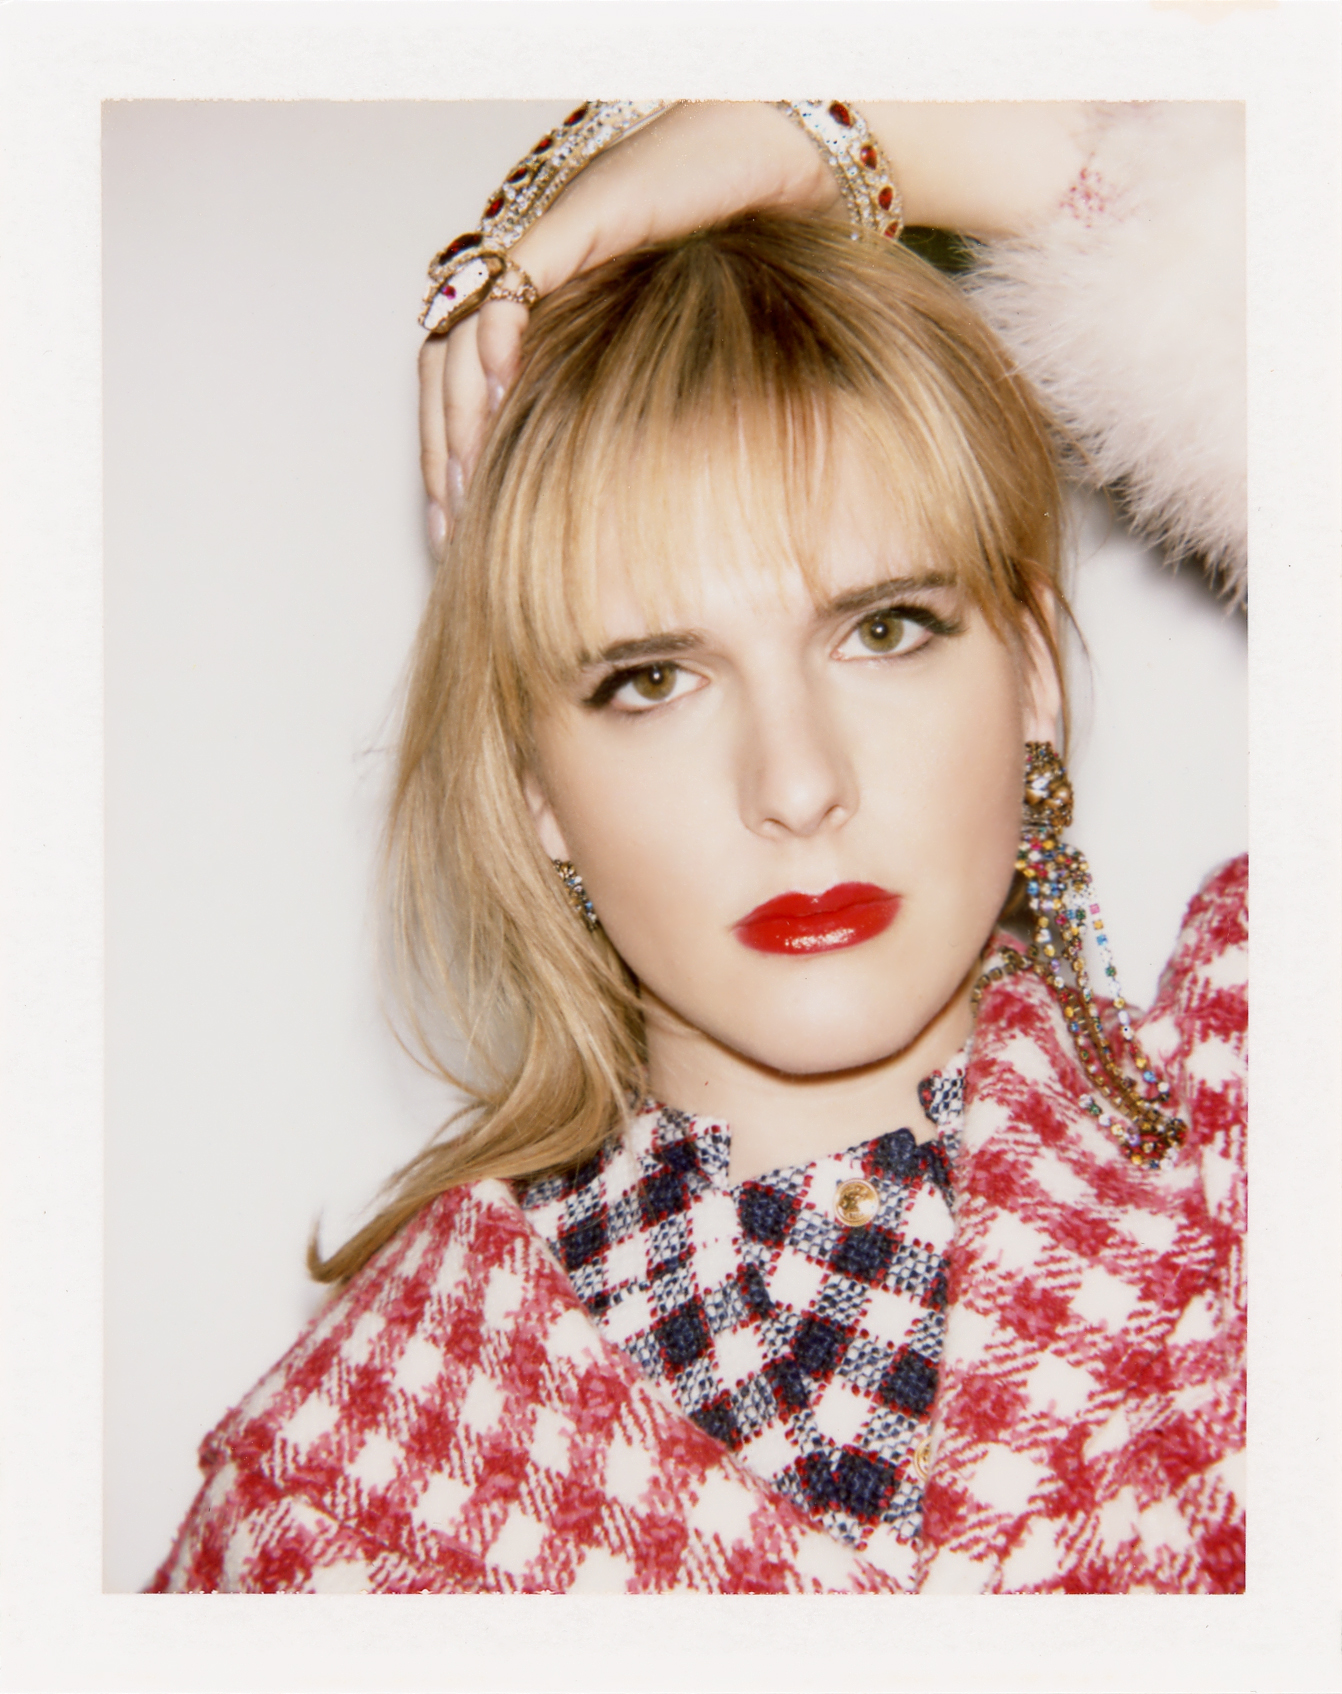   Hari Nef by Jeiroh for L’Officiel USA  